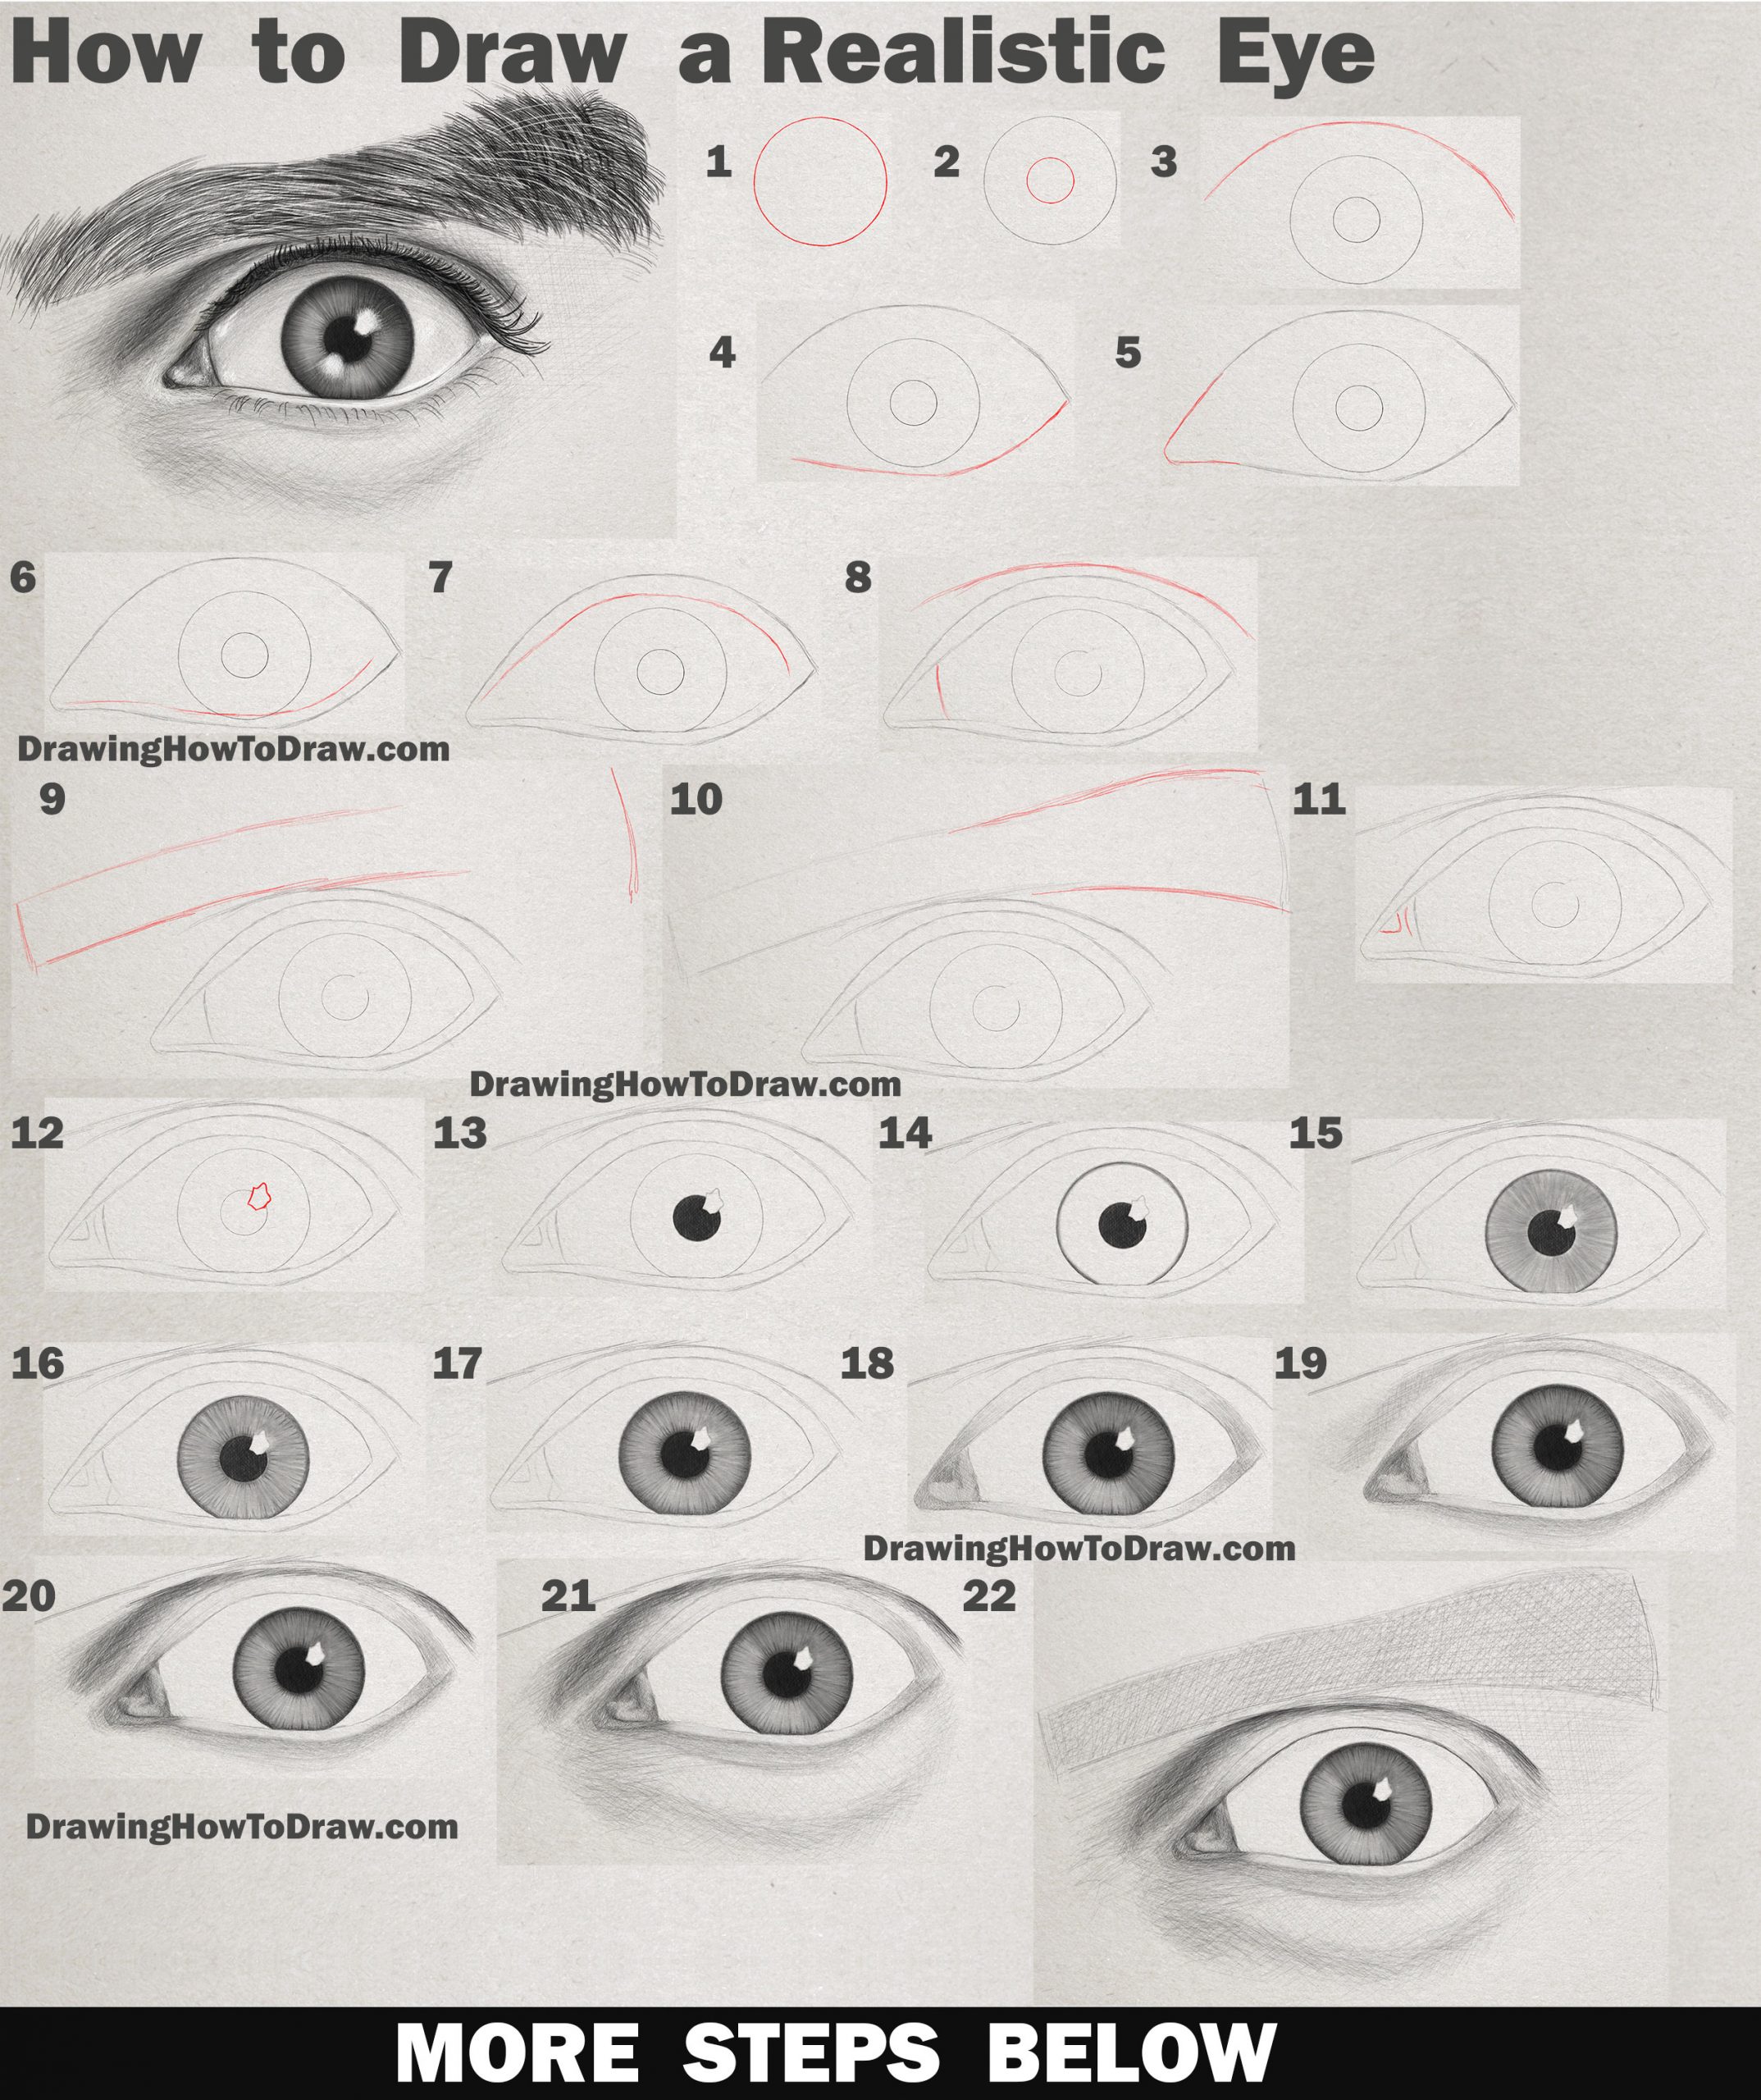 Learn How to Draw an Eye - Realistic Man's Eye - Step by Step Drawing Tutorial